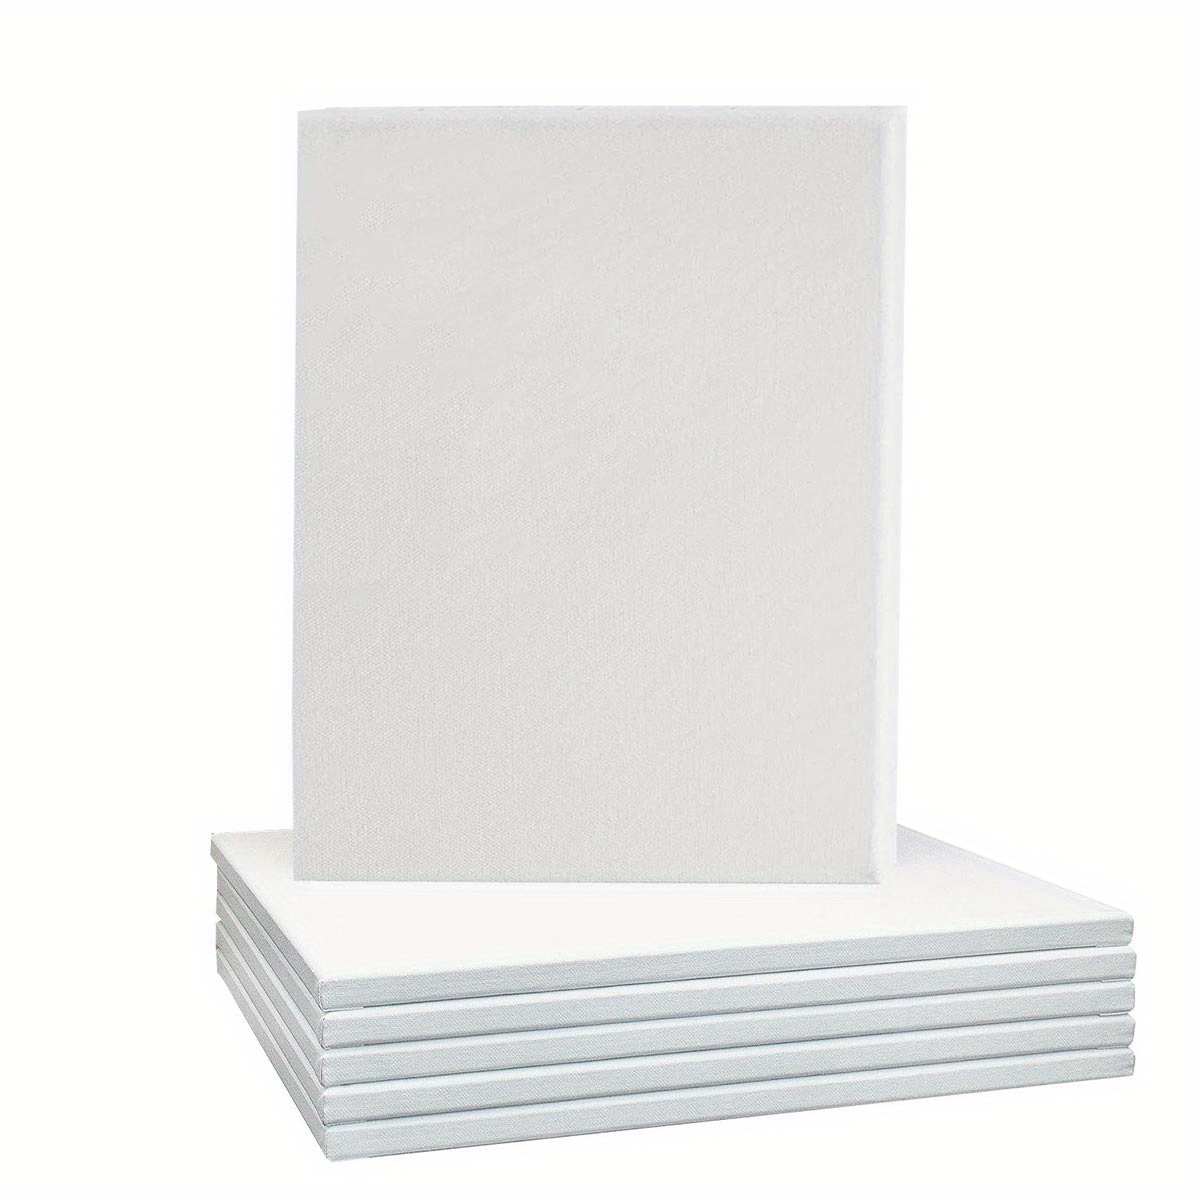 Arteza Paint Canvases for Painting Pack of 12 6 x 6 Inches Square